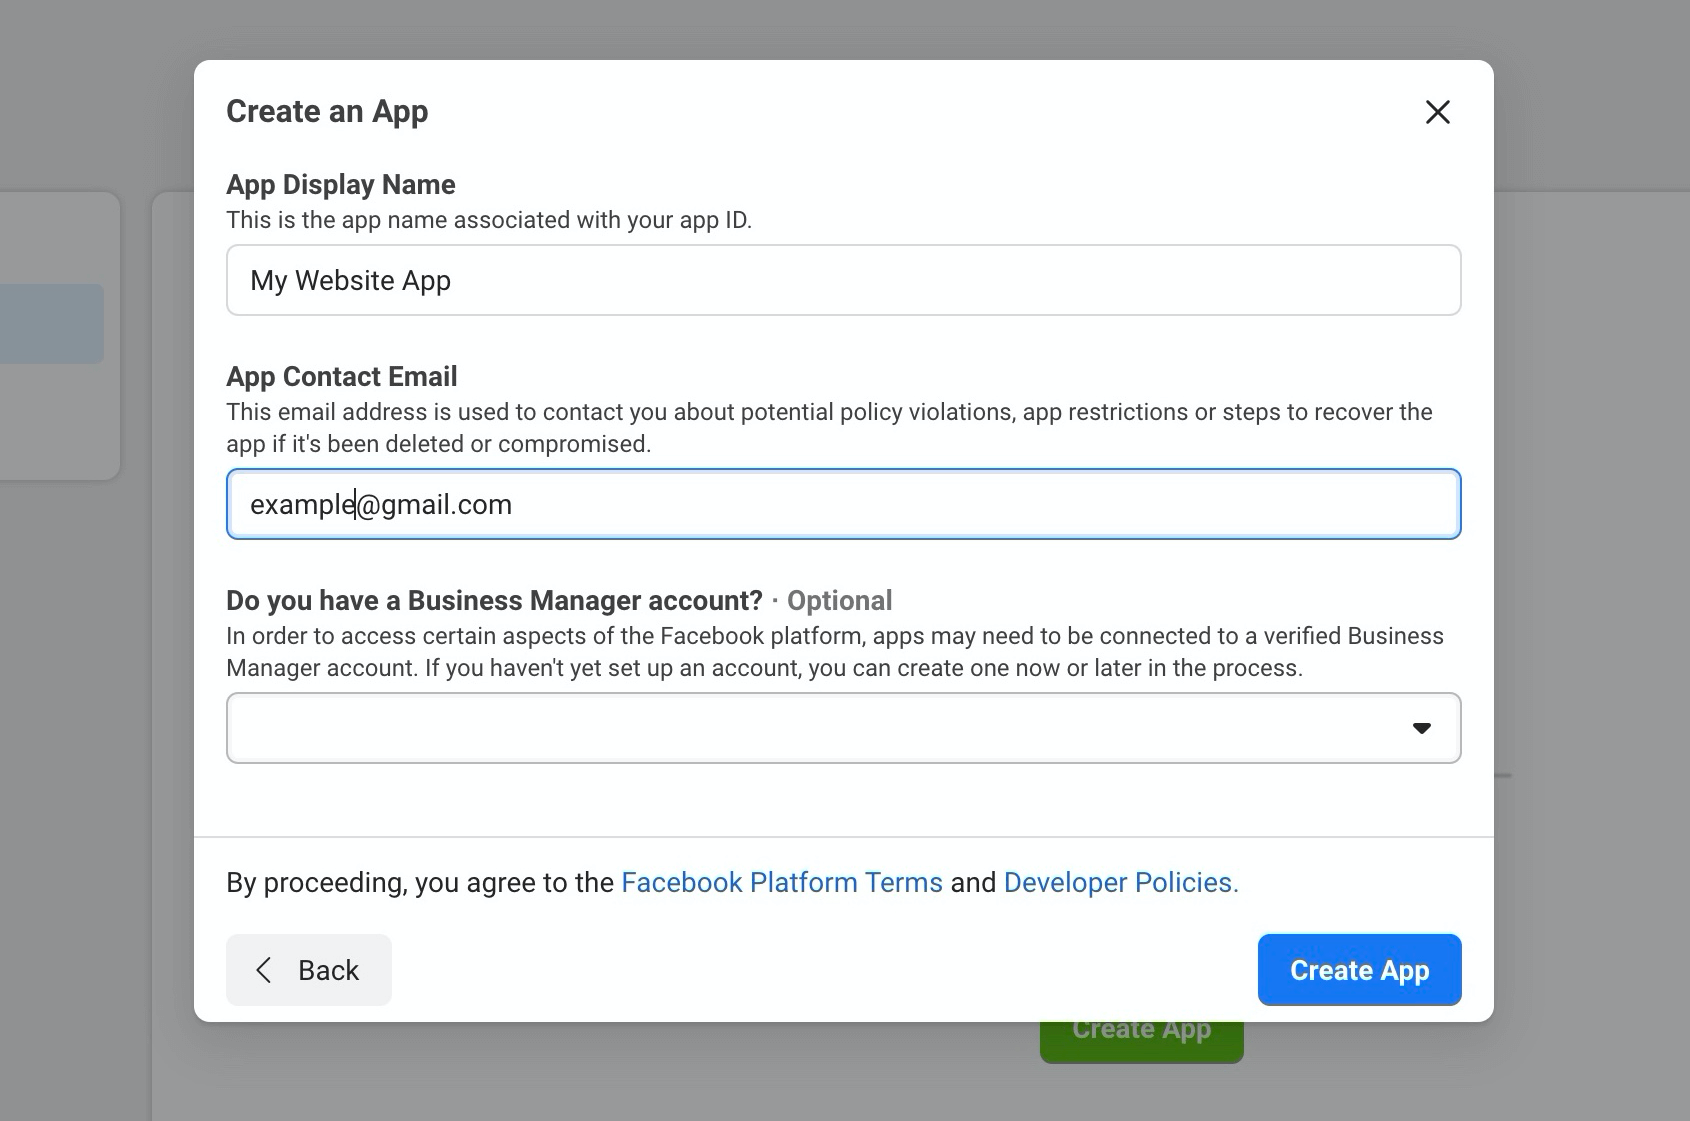 Can't login FB because the 2 factor authentication was set-up on